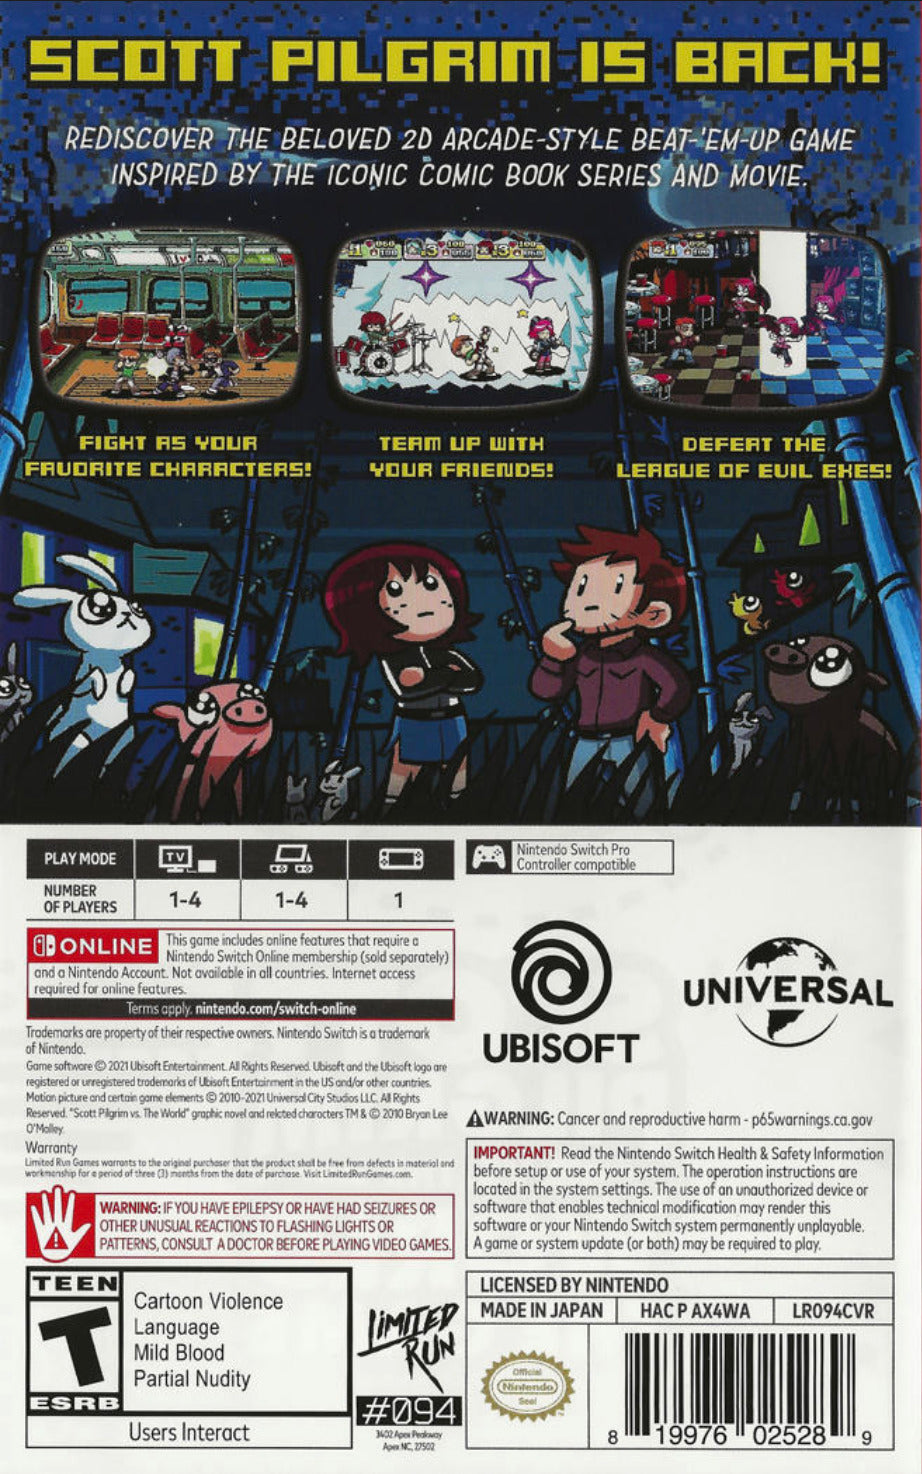 Scott Pilgrim vs The World: The Game - Complete Edition - (NSW) Nintendo Switch [Pre-Owned] Video Games Limited Run Games   